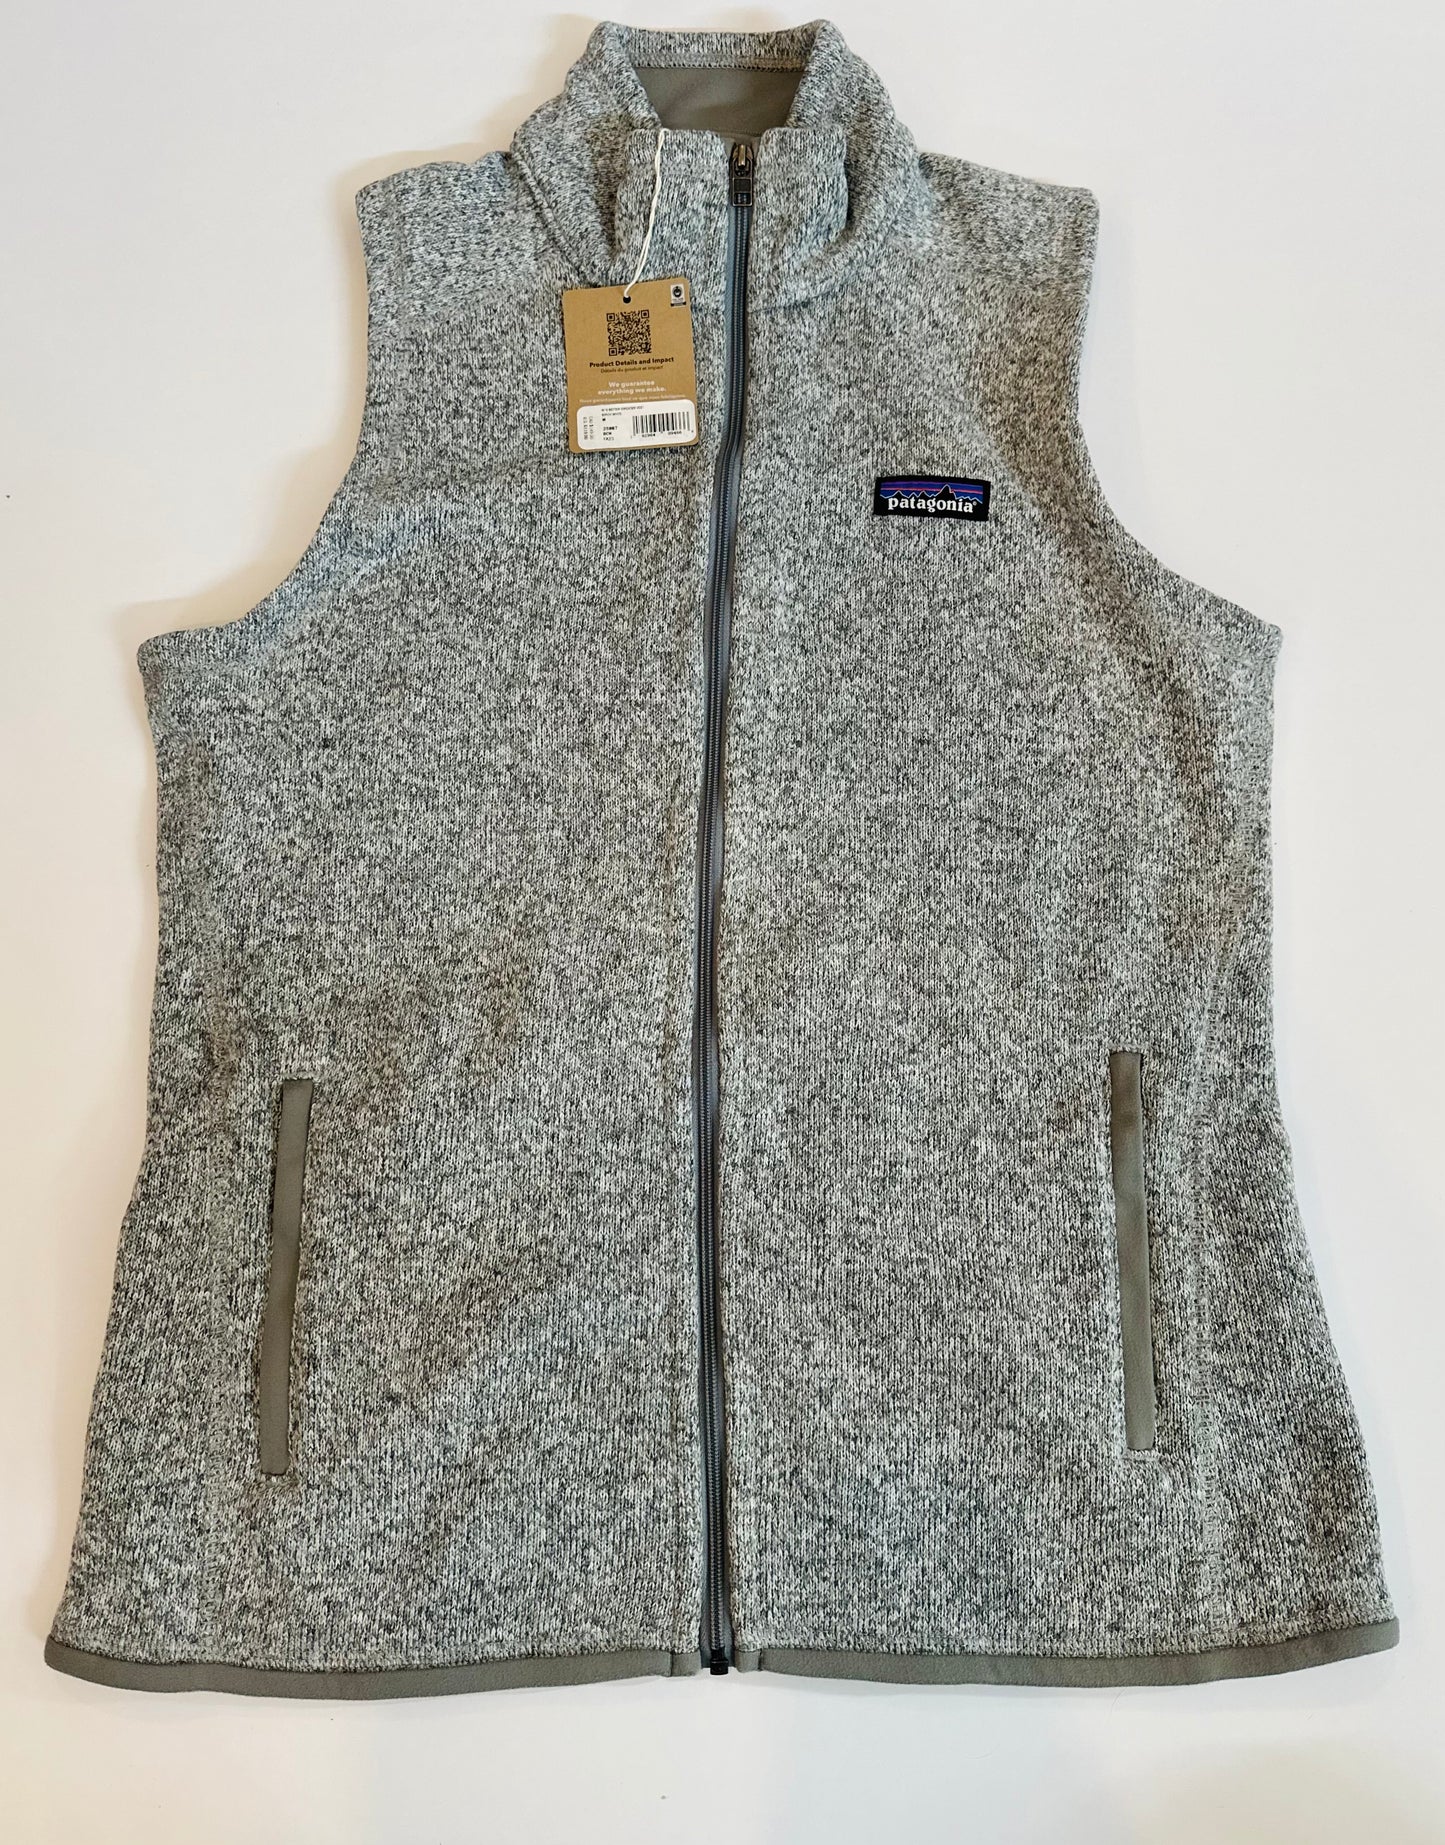 Patagonia | small | NWT |  better sweater vest